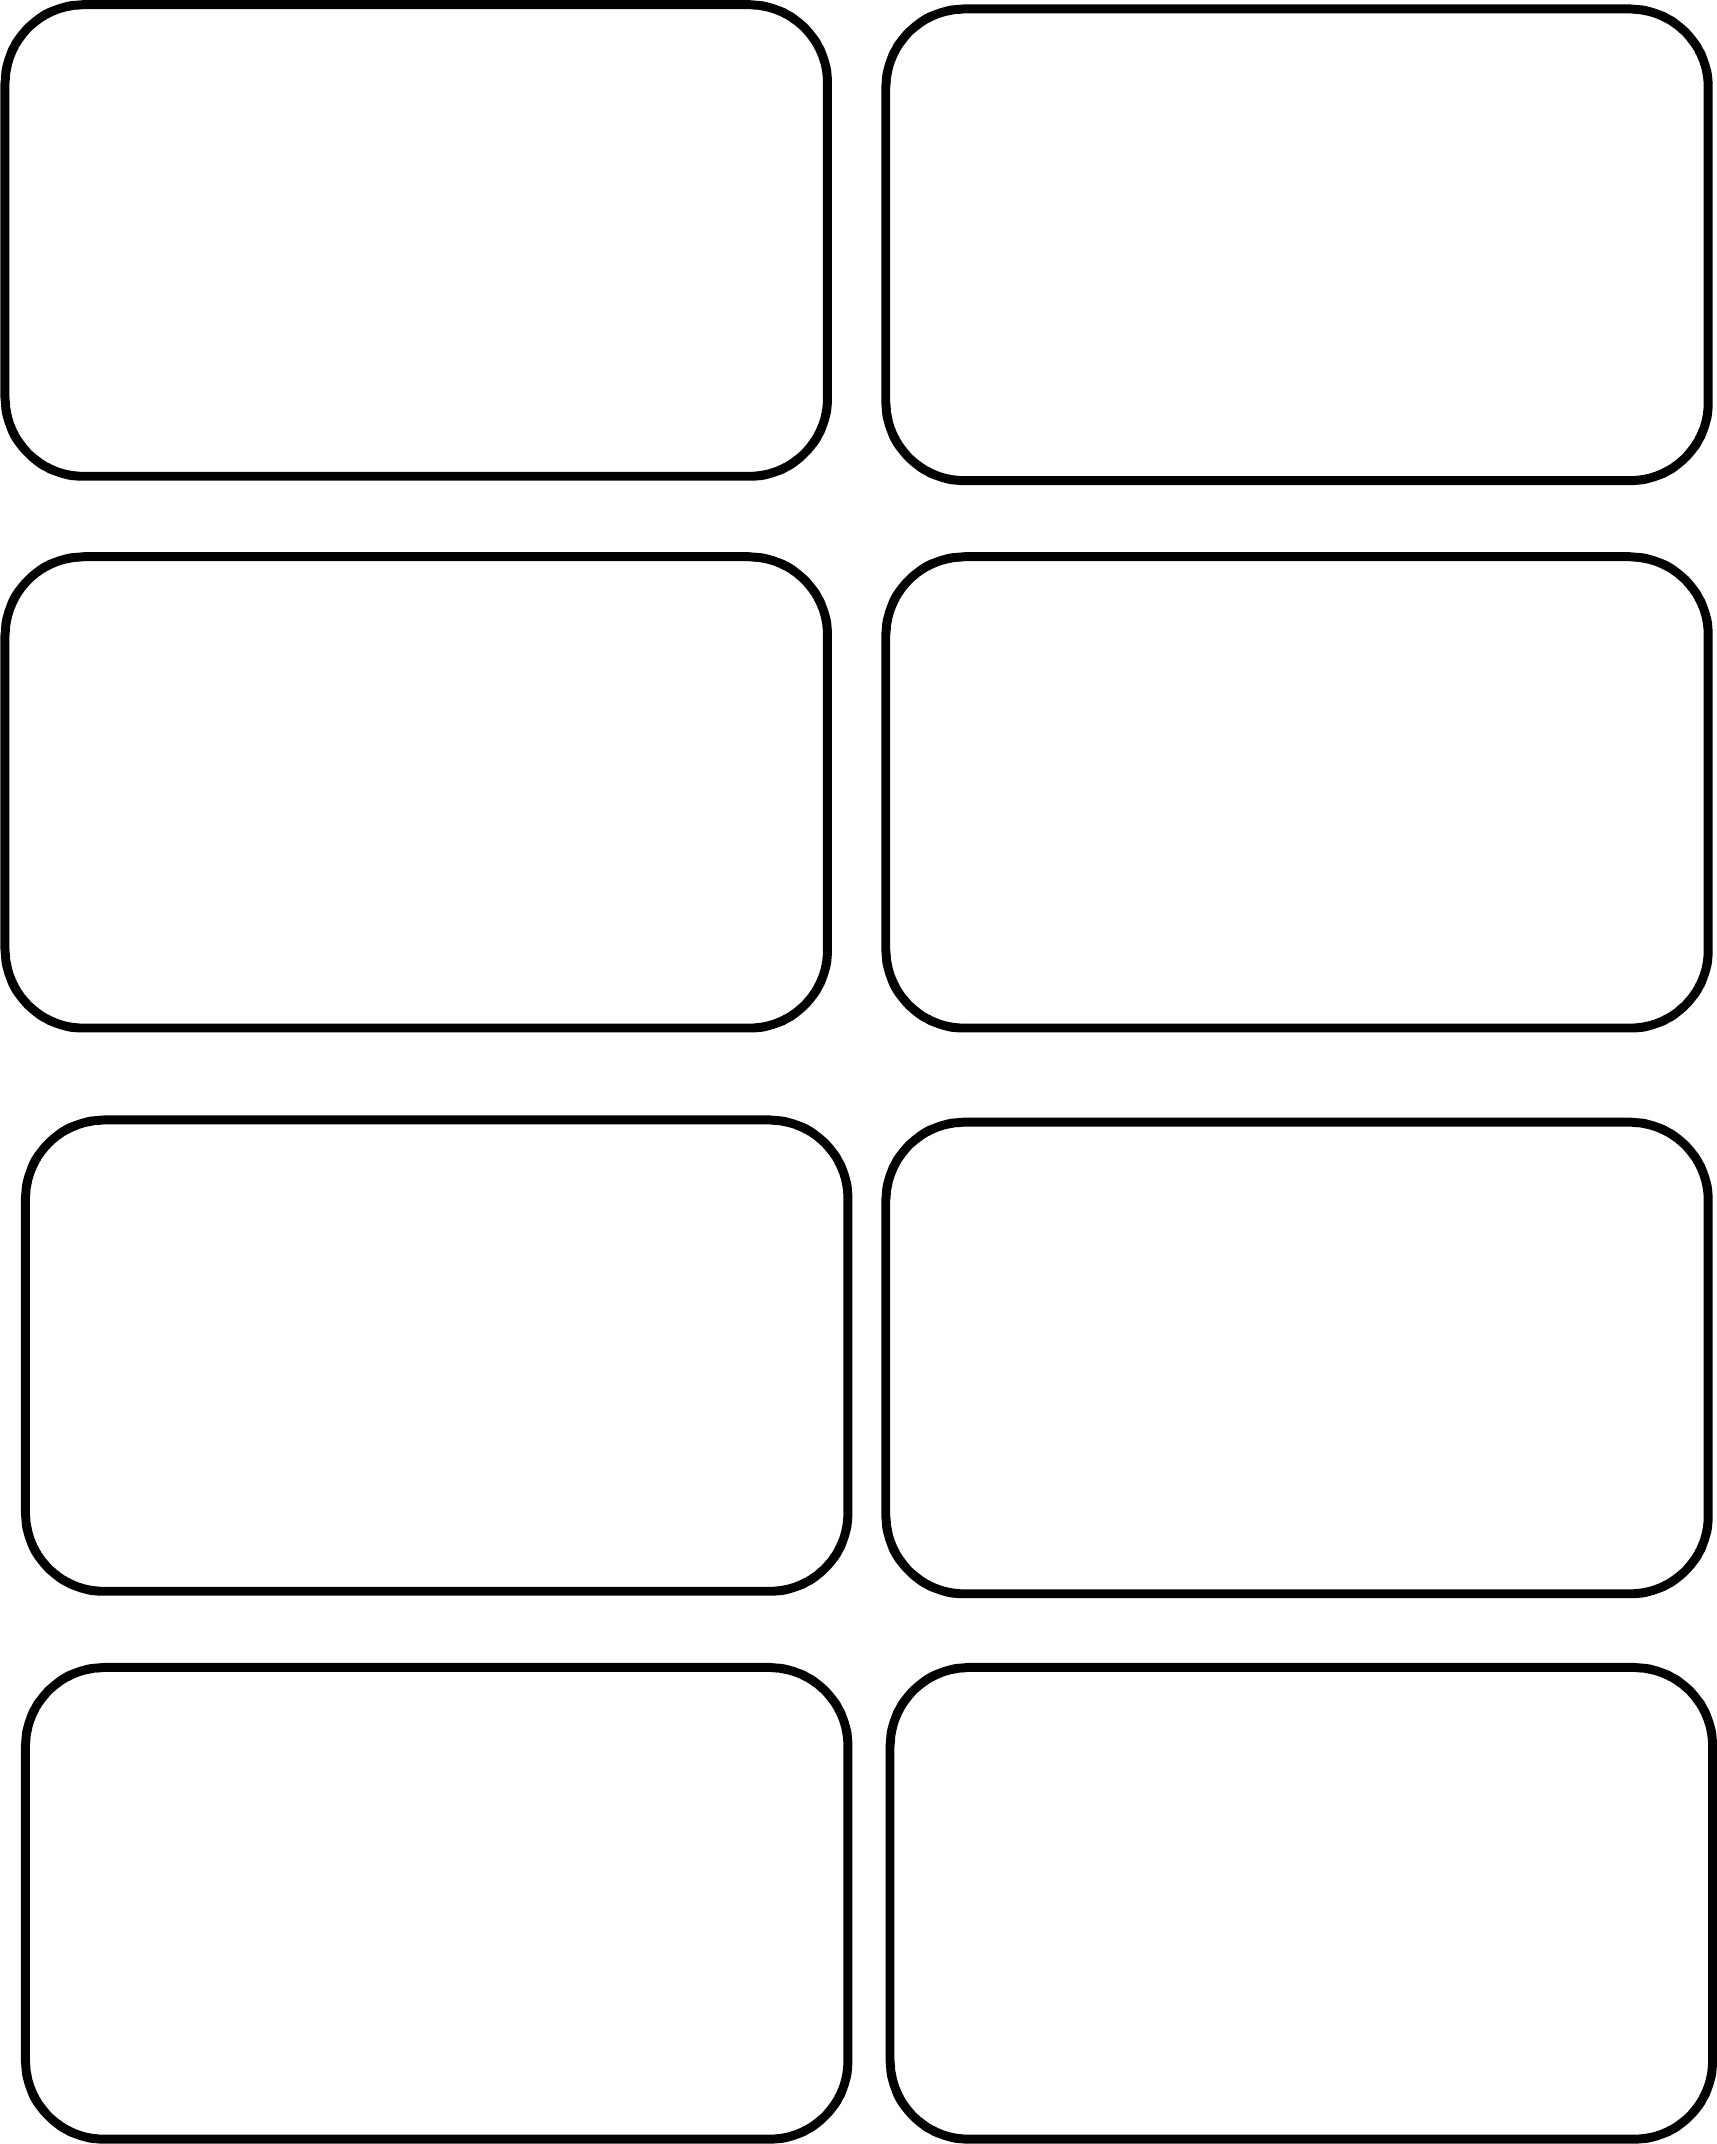 Printable Luggage Tag Templates | Download Them Or Print With Blank Luggage Tag Template